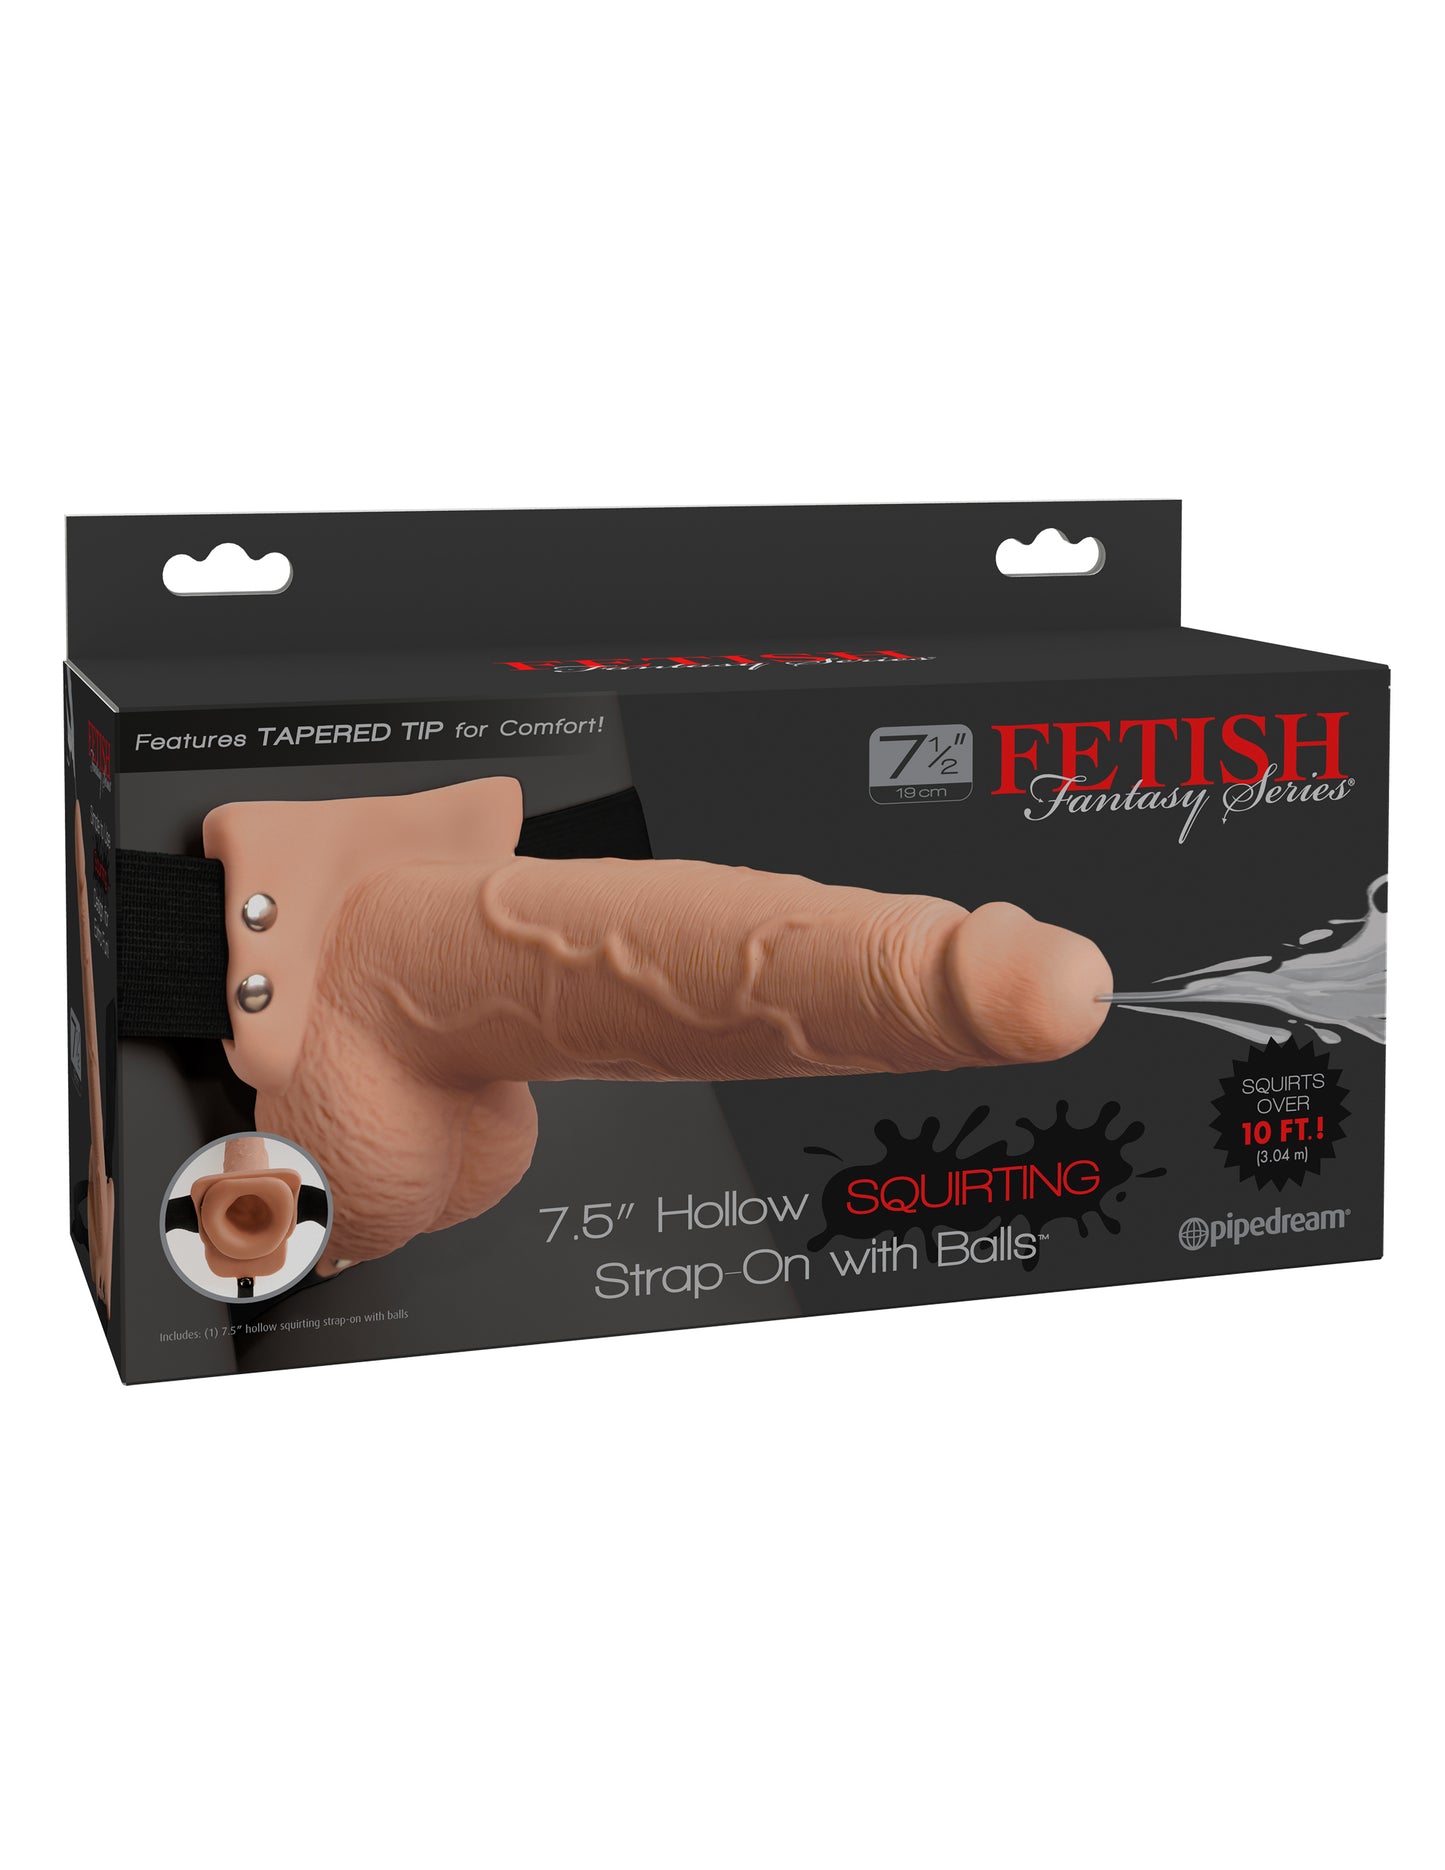 FETISH FANTASY 7.5 INCH HOLLOW SQUIRTING STRAP-ON WITH BALLS